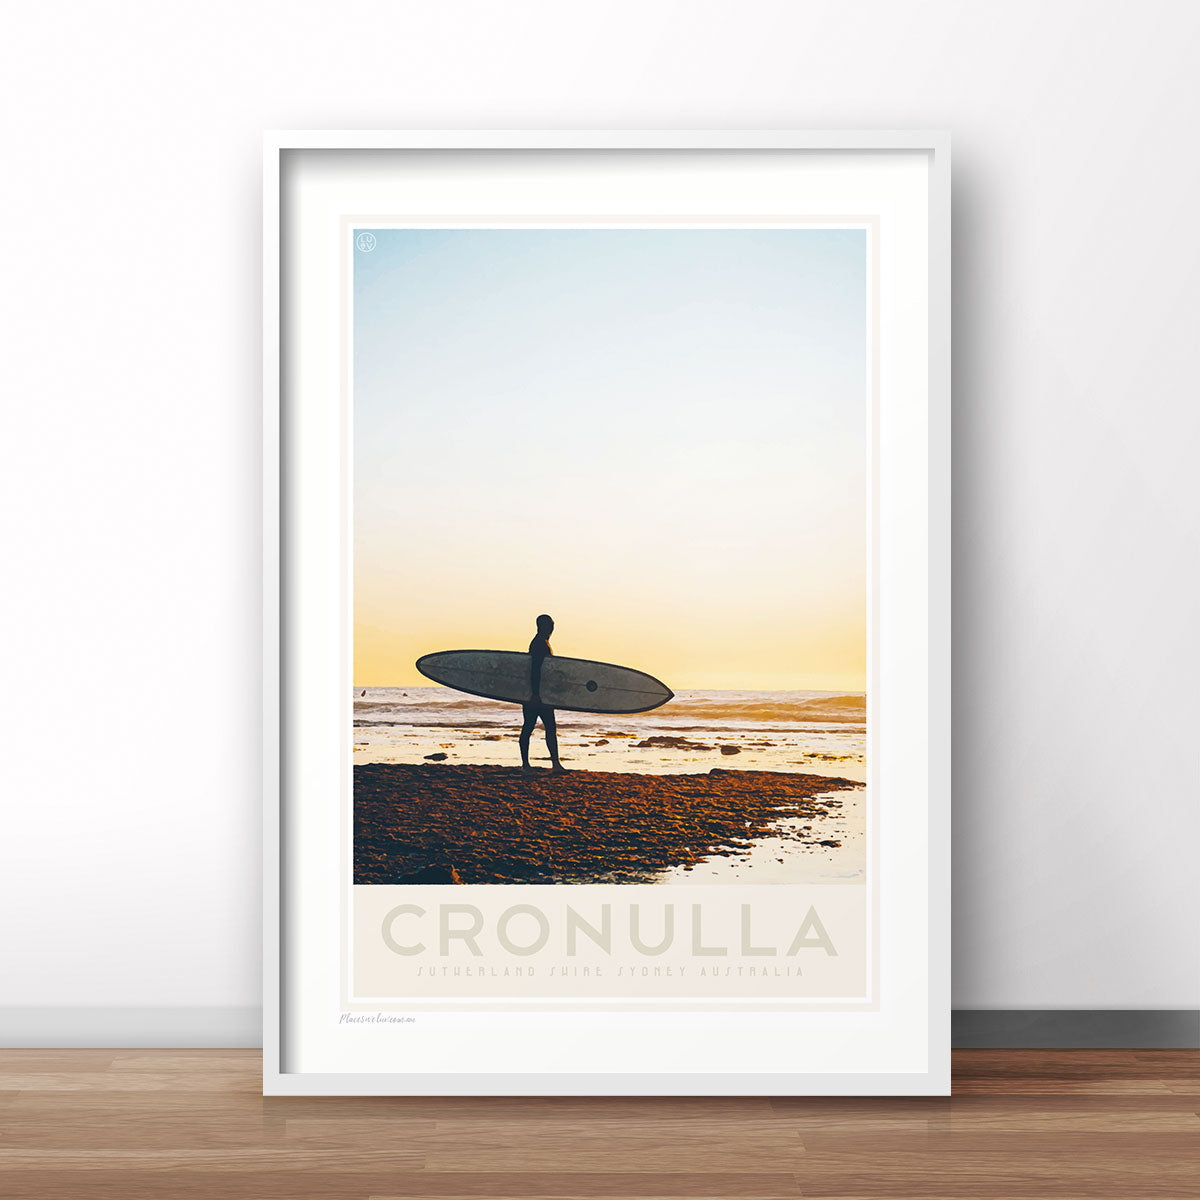 Cronulla beach vintage tourism style poster by places we luv